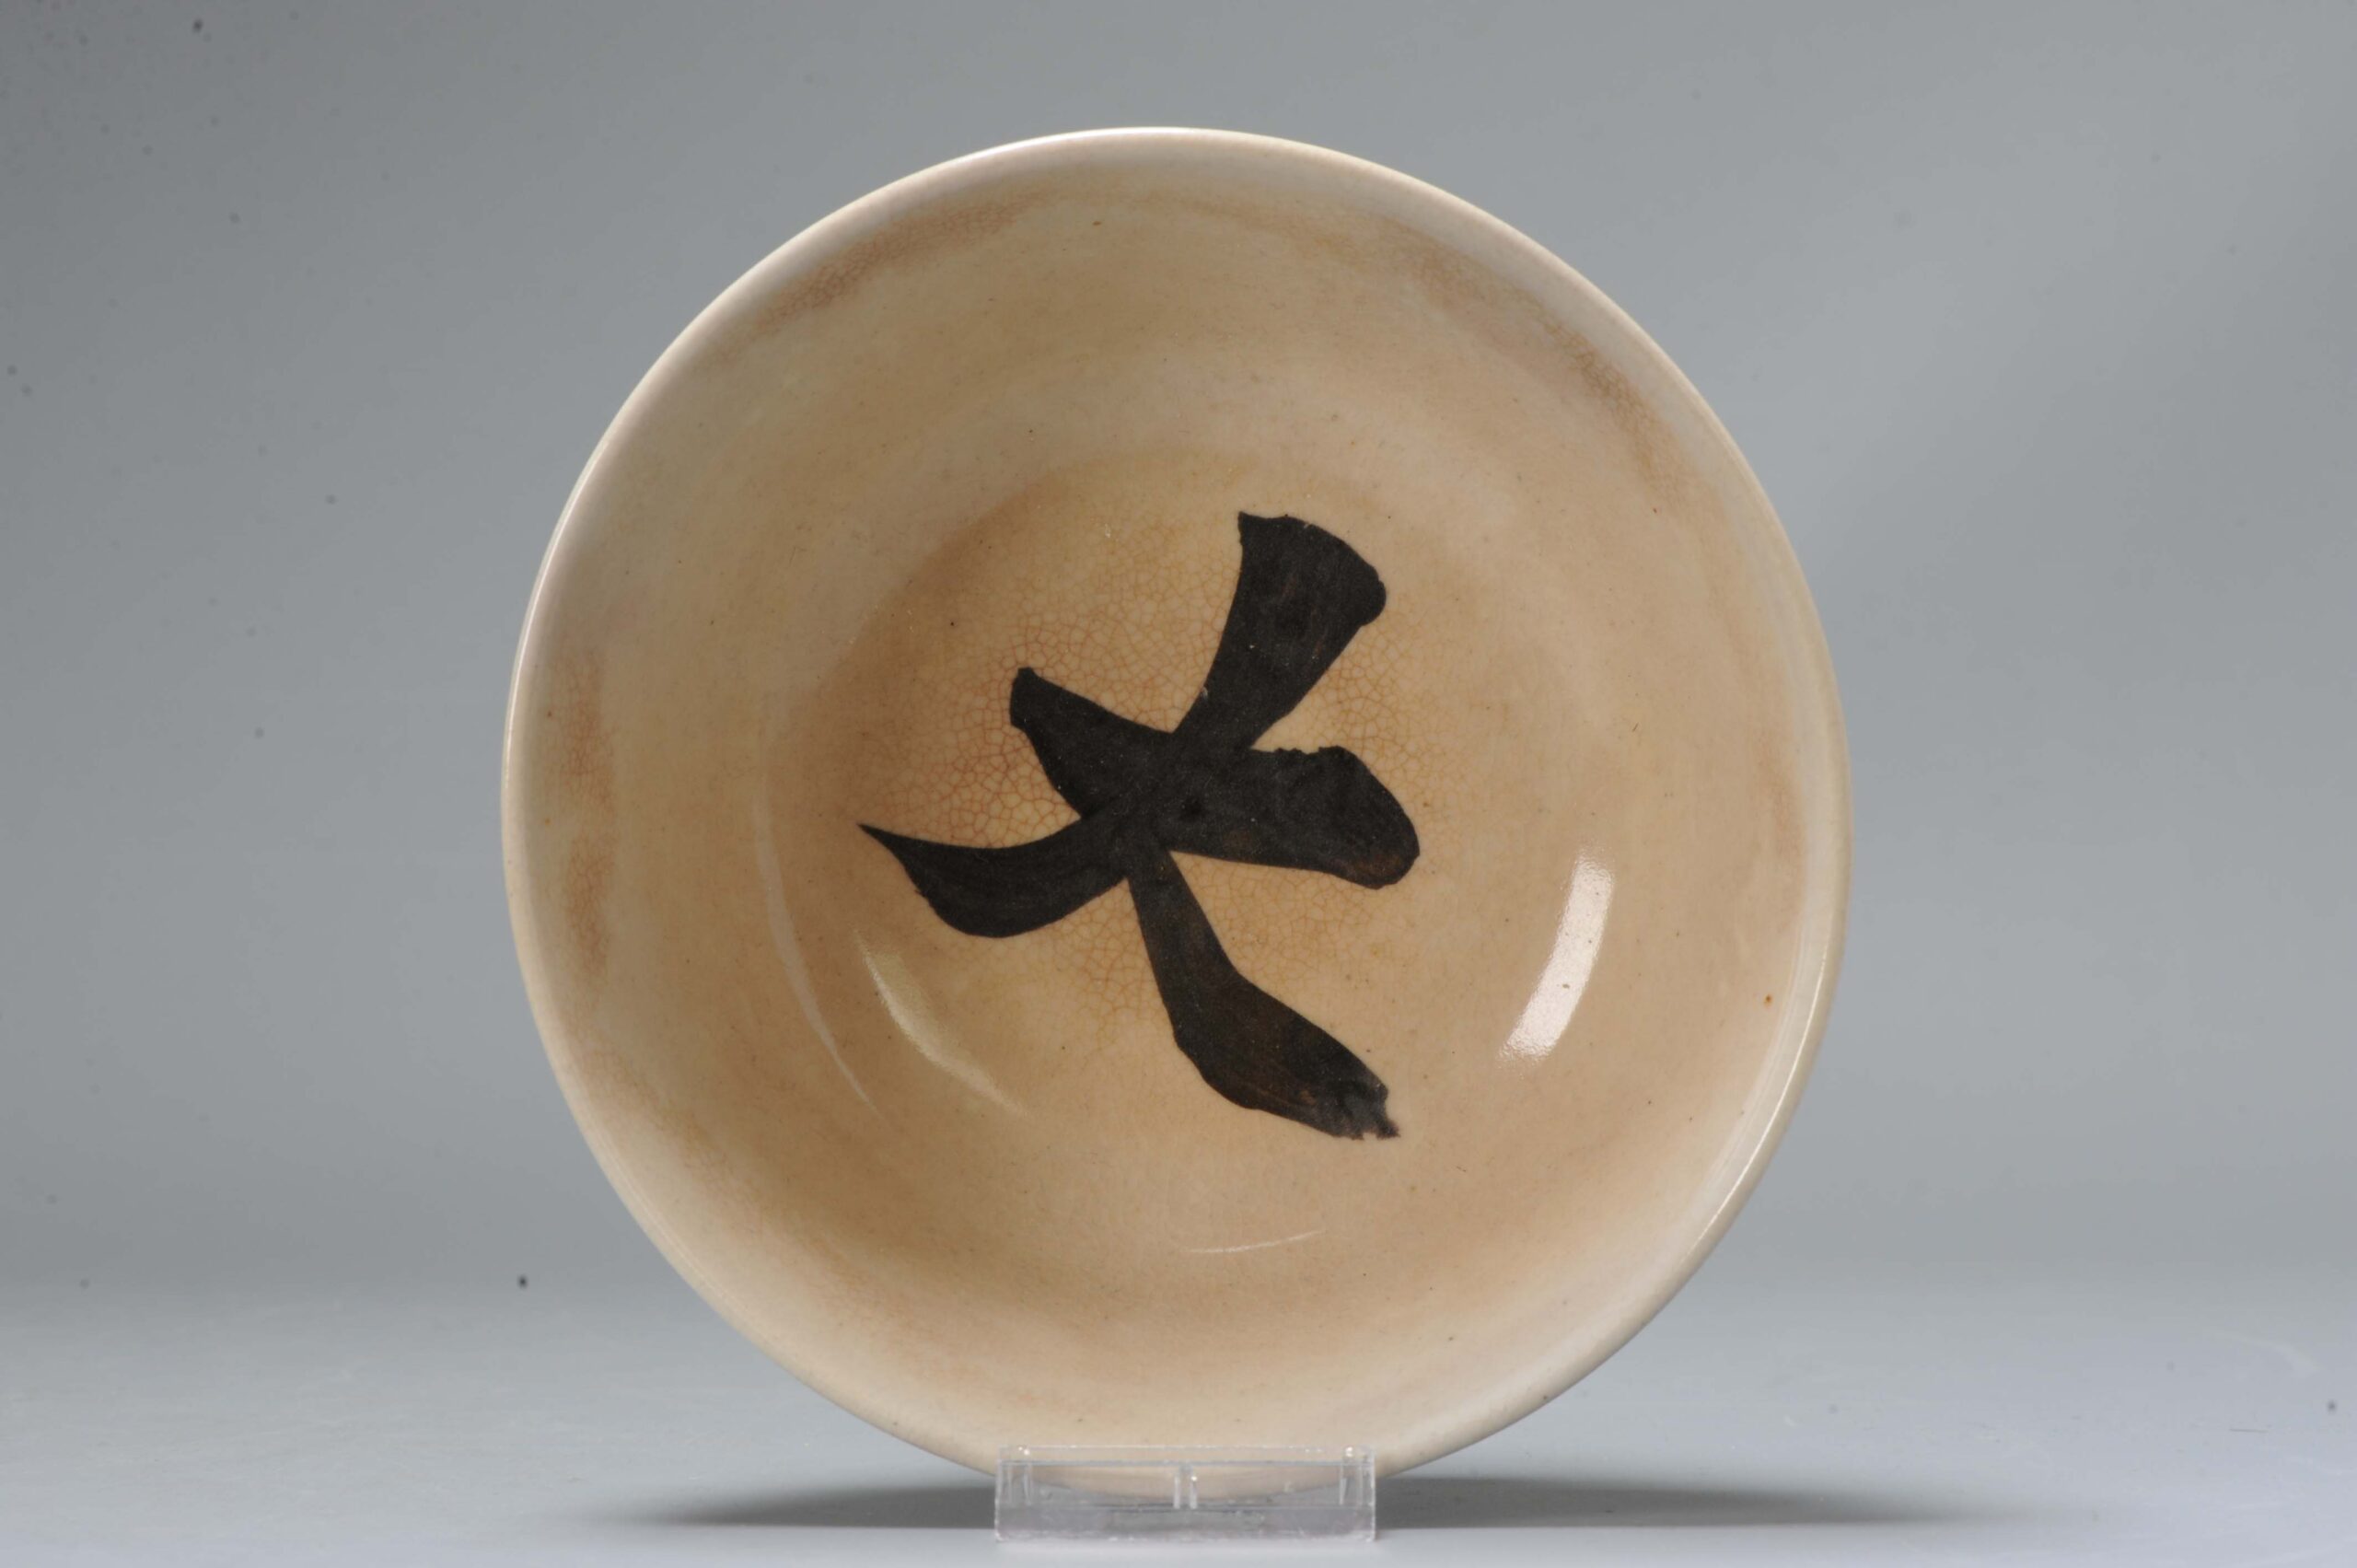 Vintage Japanese 20th c Period Chawan Tea Bowl with Character